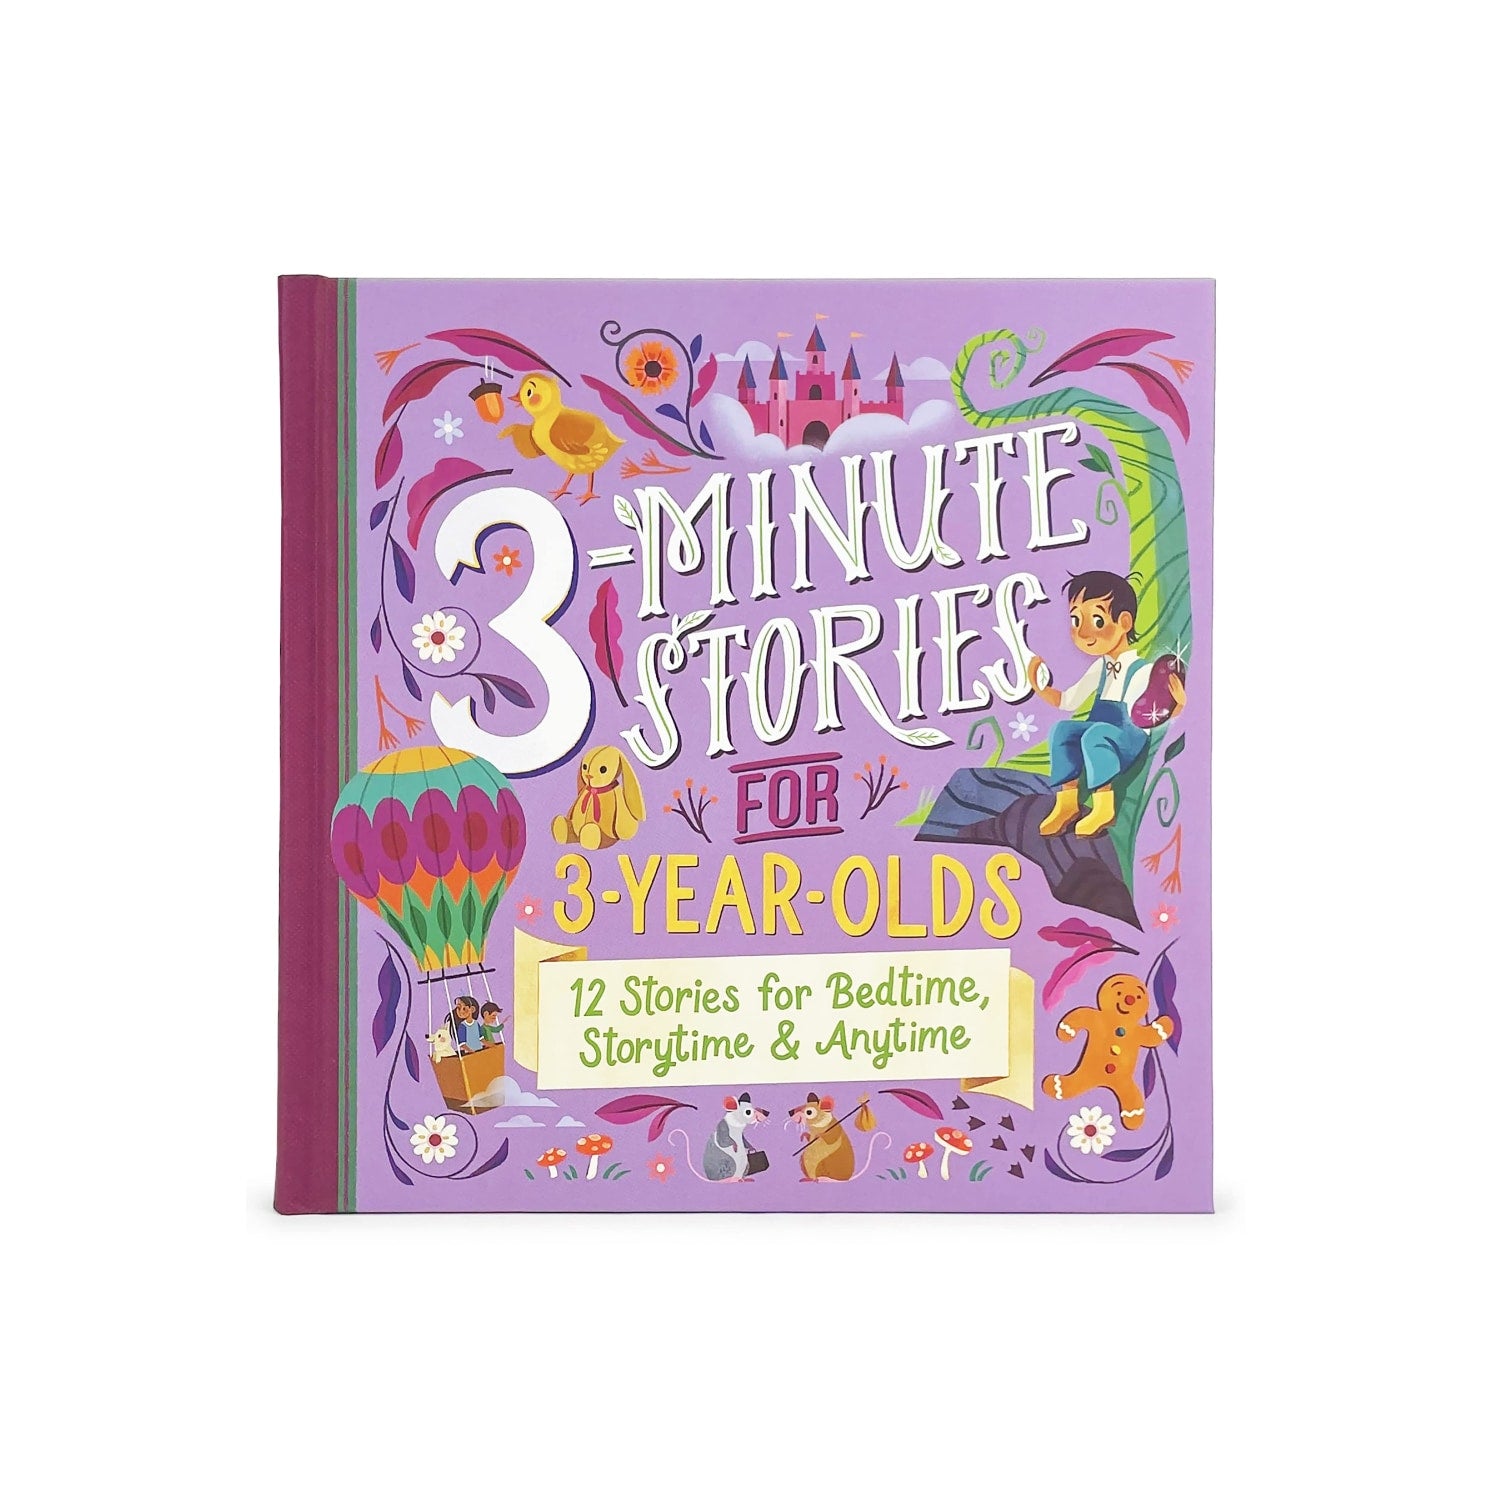 3-Minute Stories for 3-Year-Olds